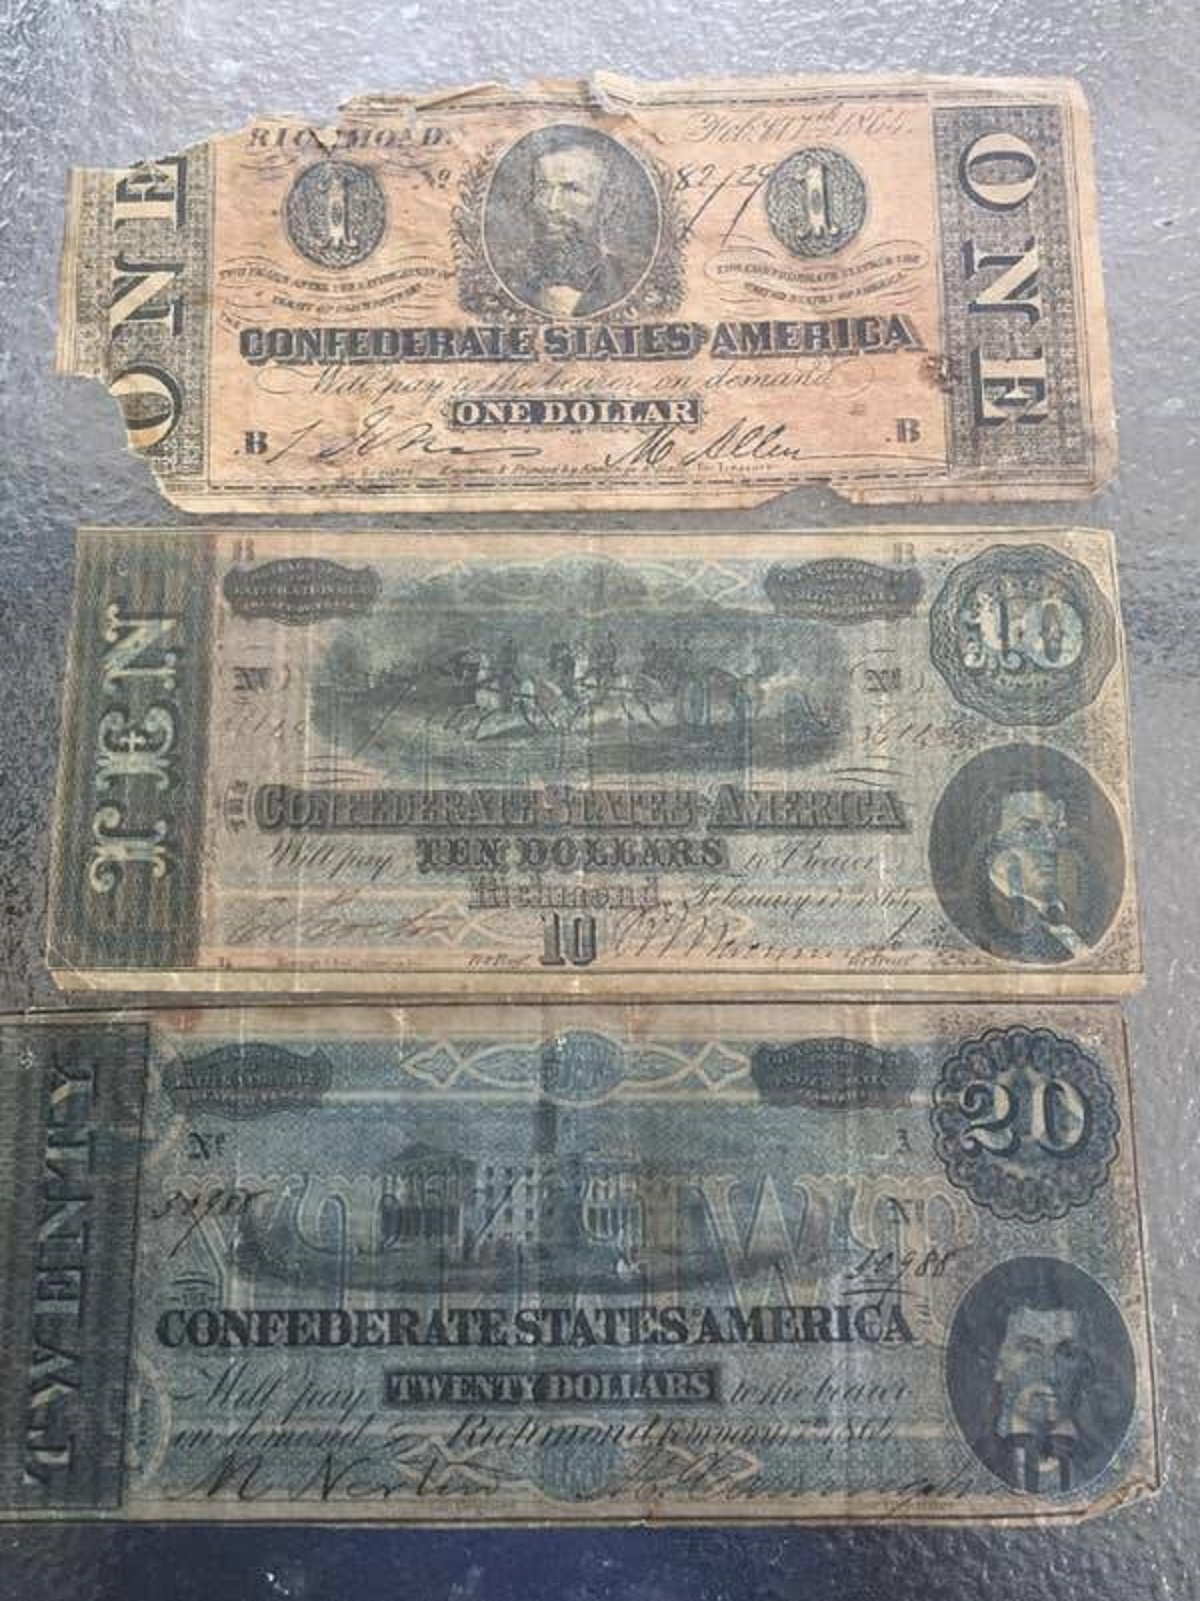 Here's what Confederate currency looked like.